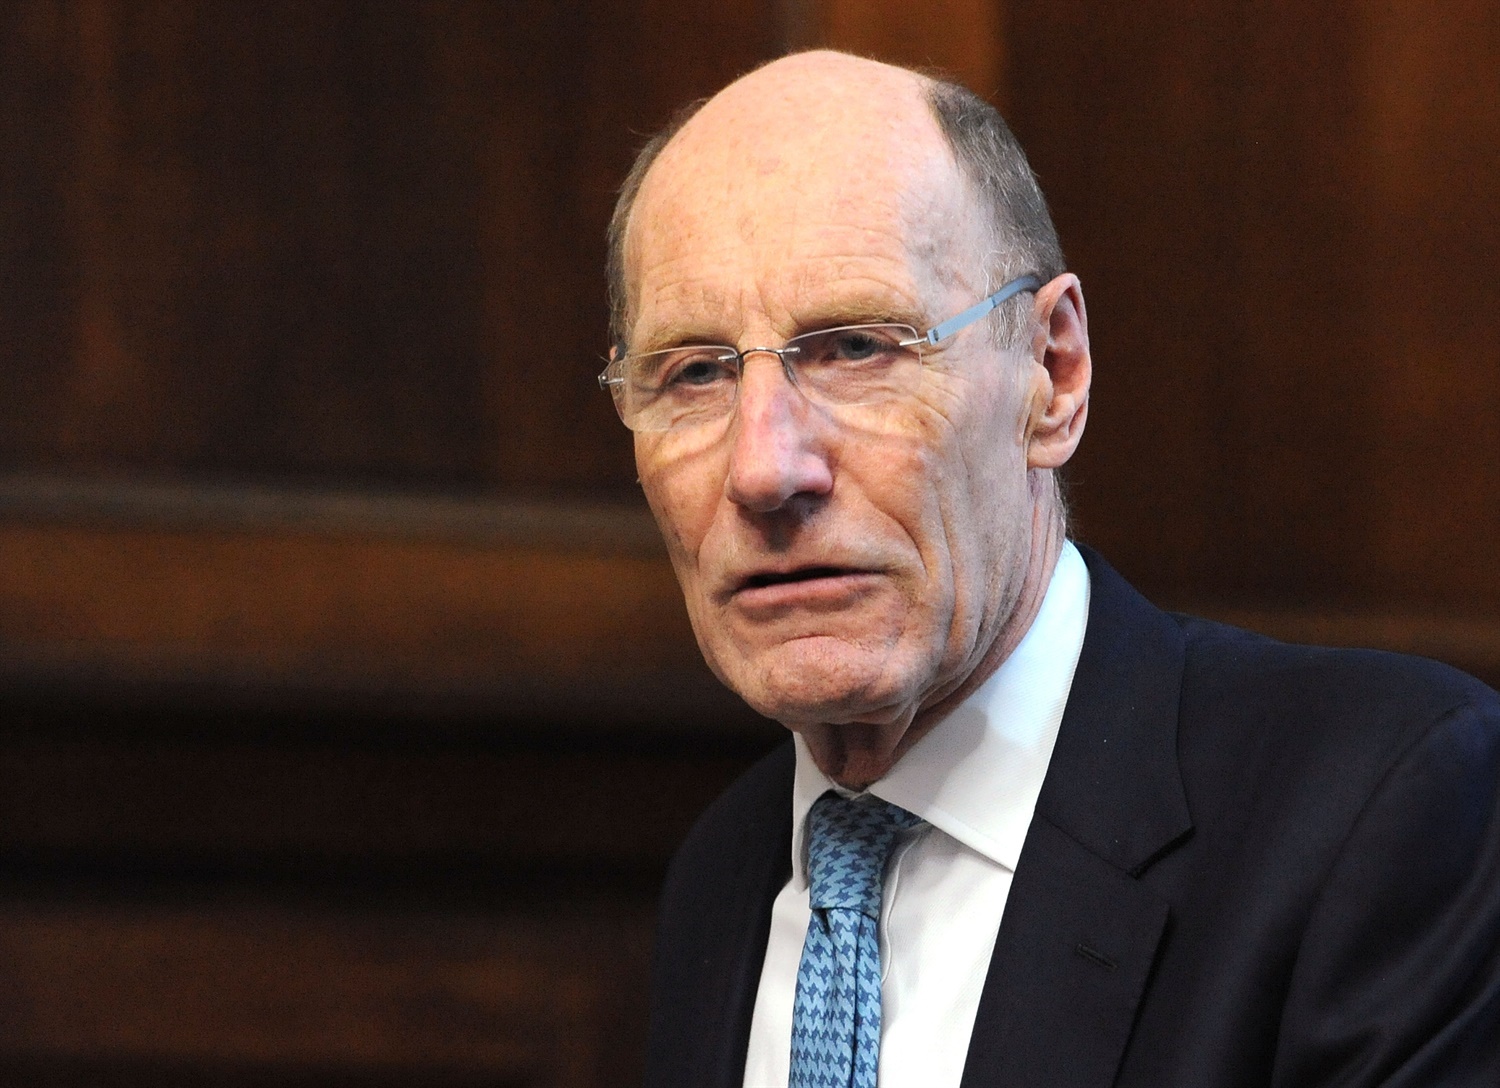 HS2 Phase 2 could be almost 30% cheaper, Armitt’s PwC review finds